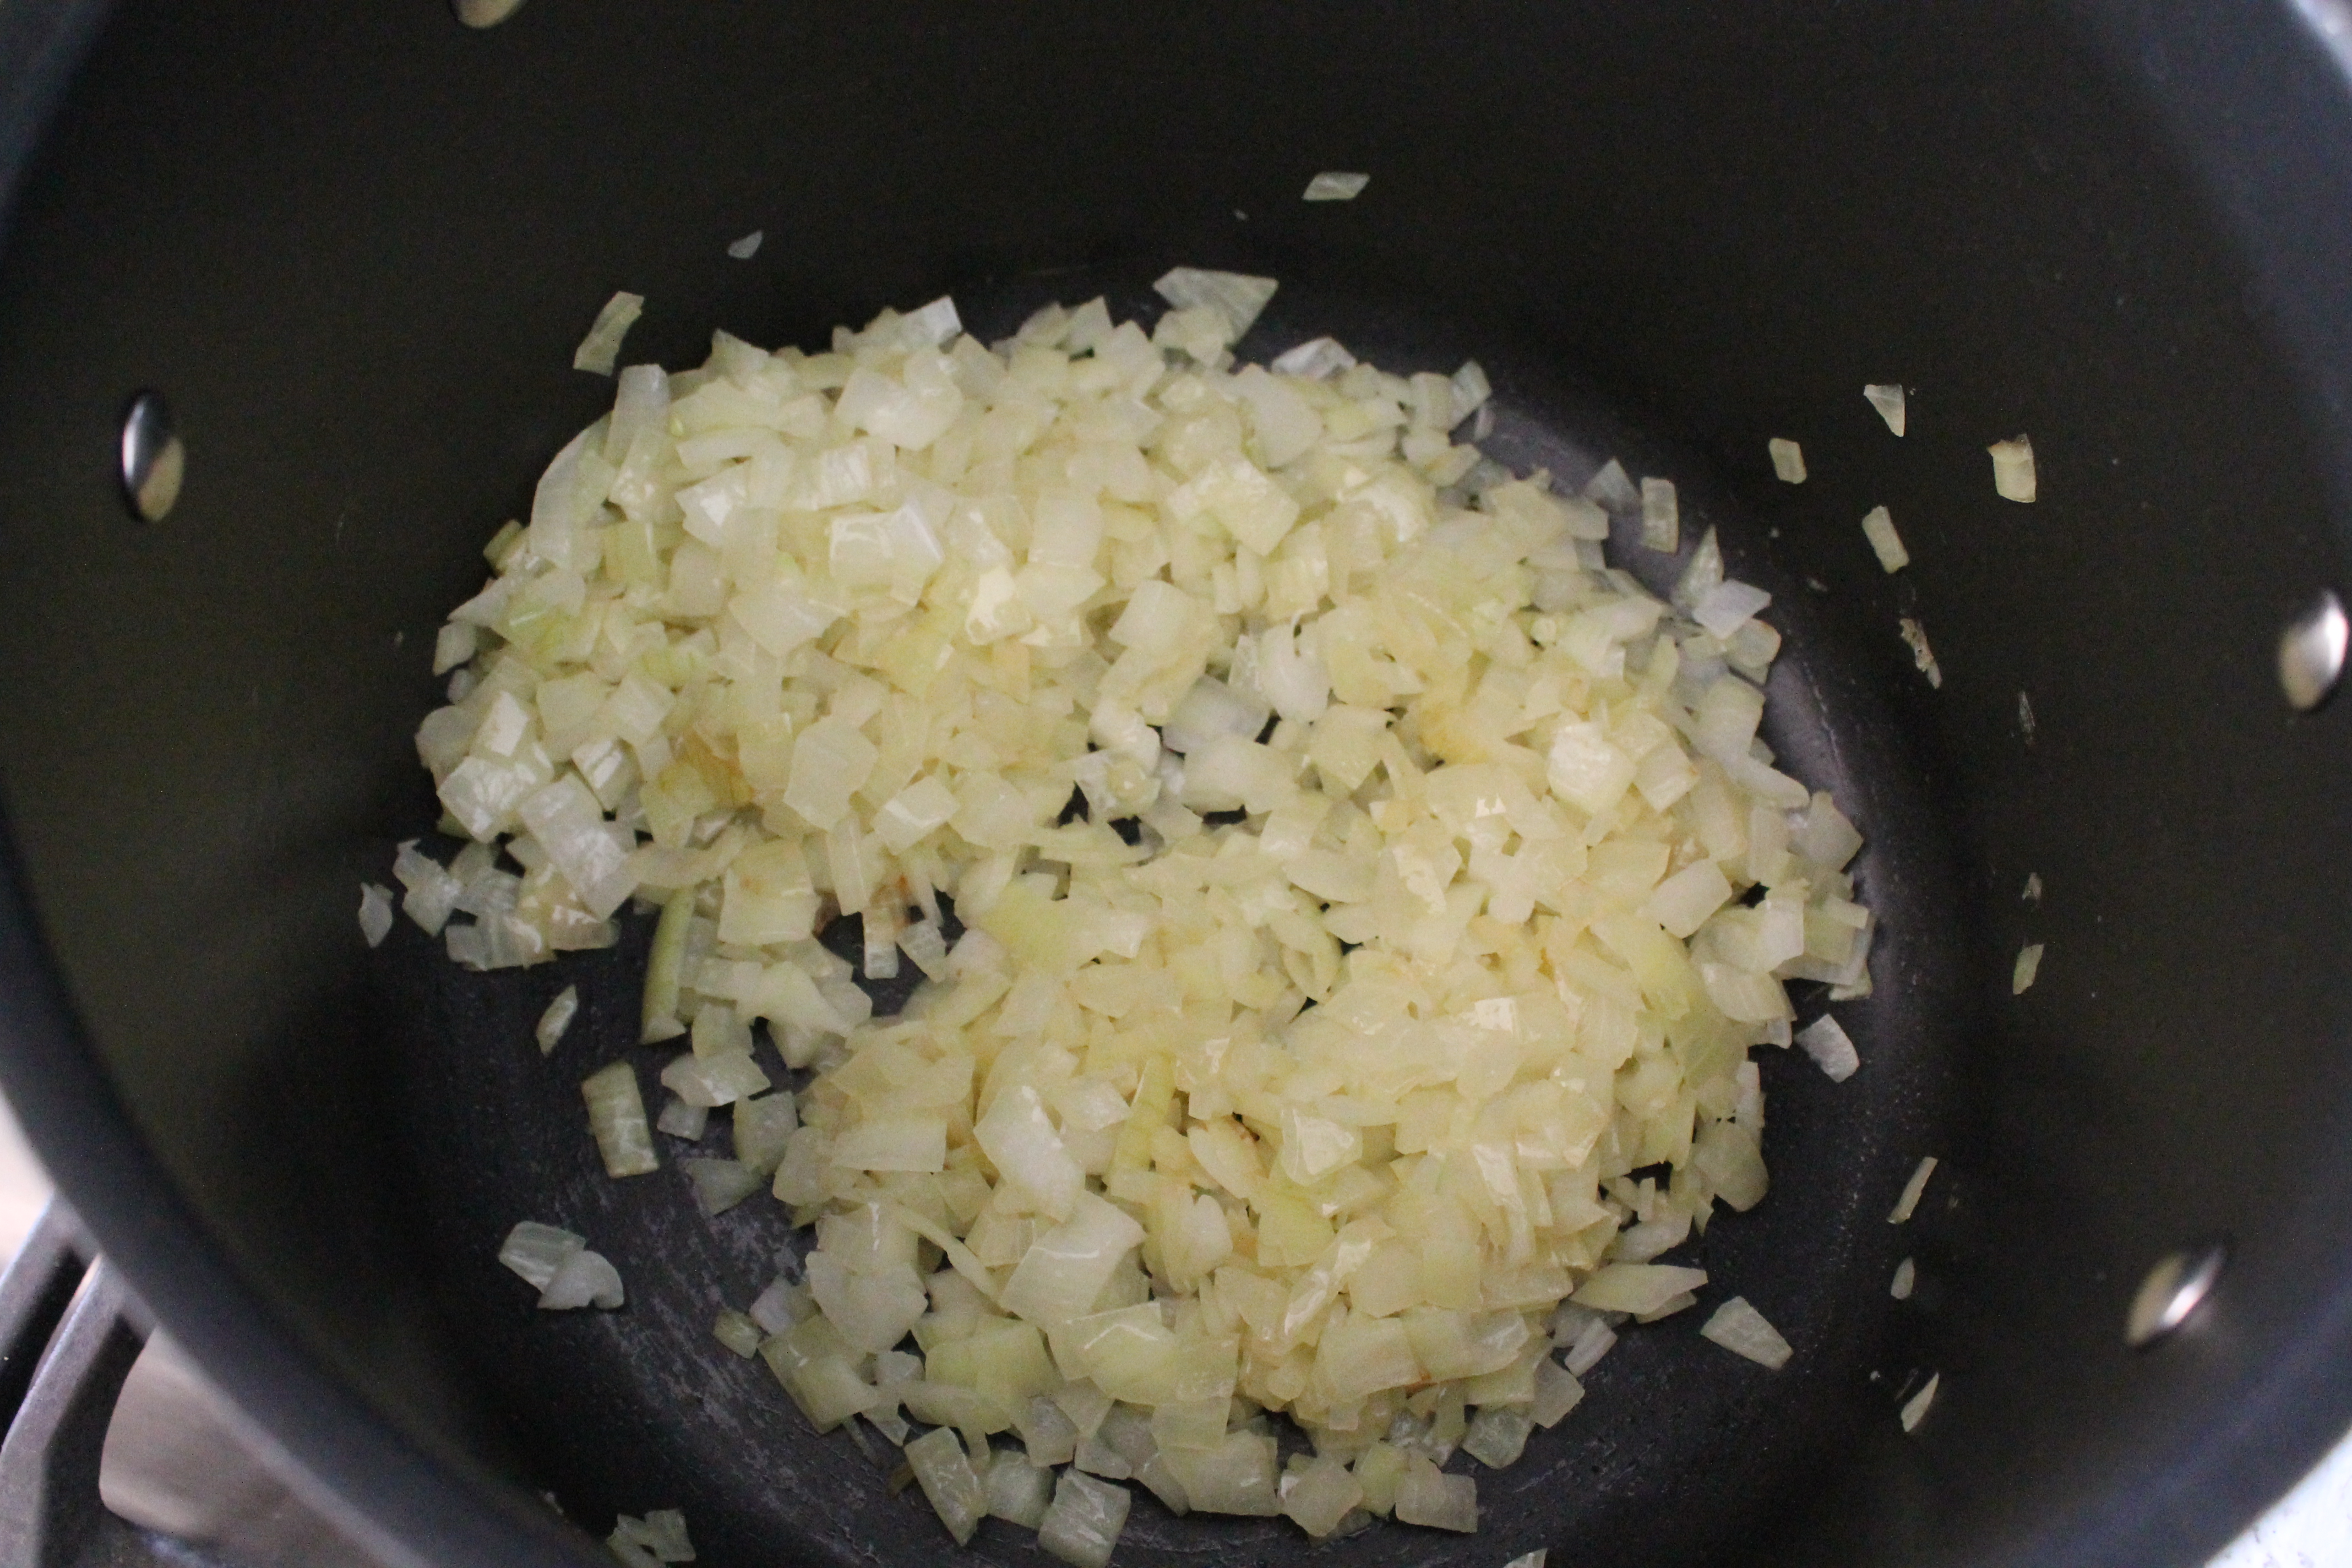 Onions Browning